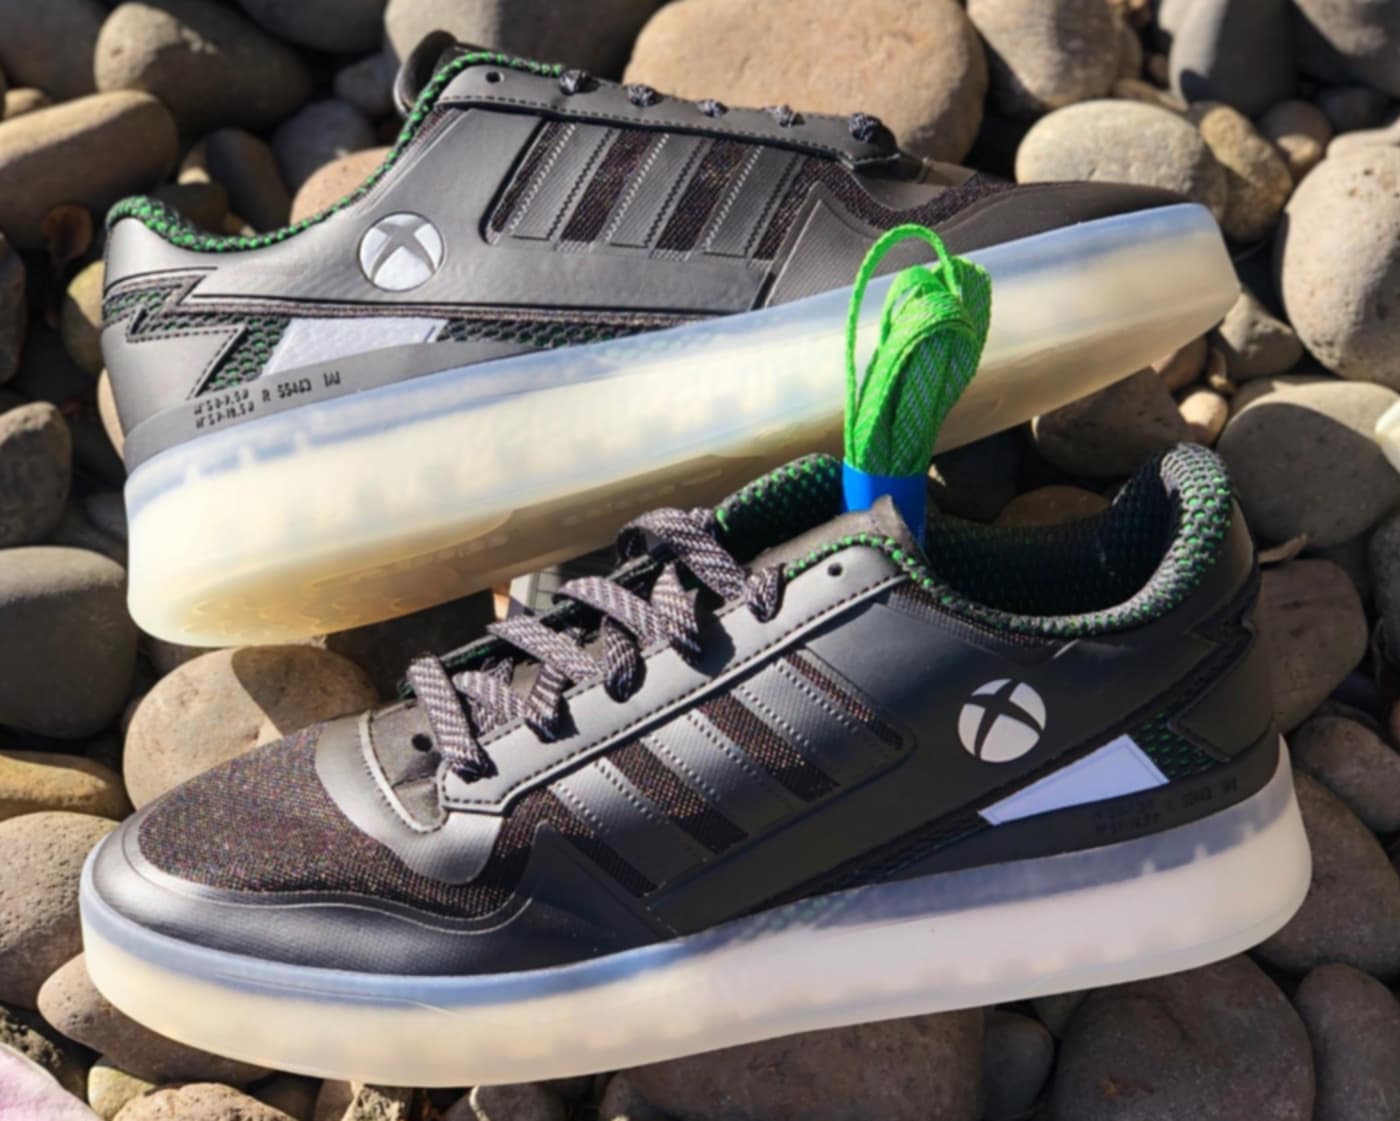 information Rustic Drill PS5 Got Nike Shoes, So Xbox Seems to Be Getting Adidas Shoes - IGN